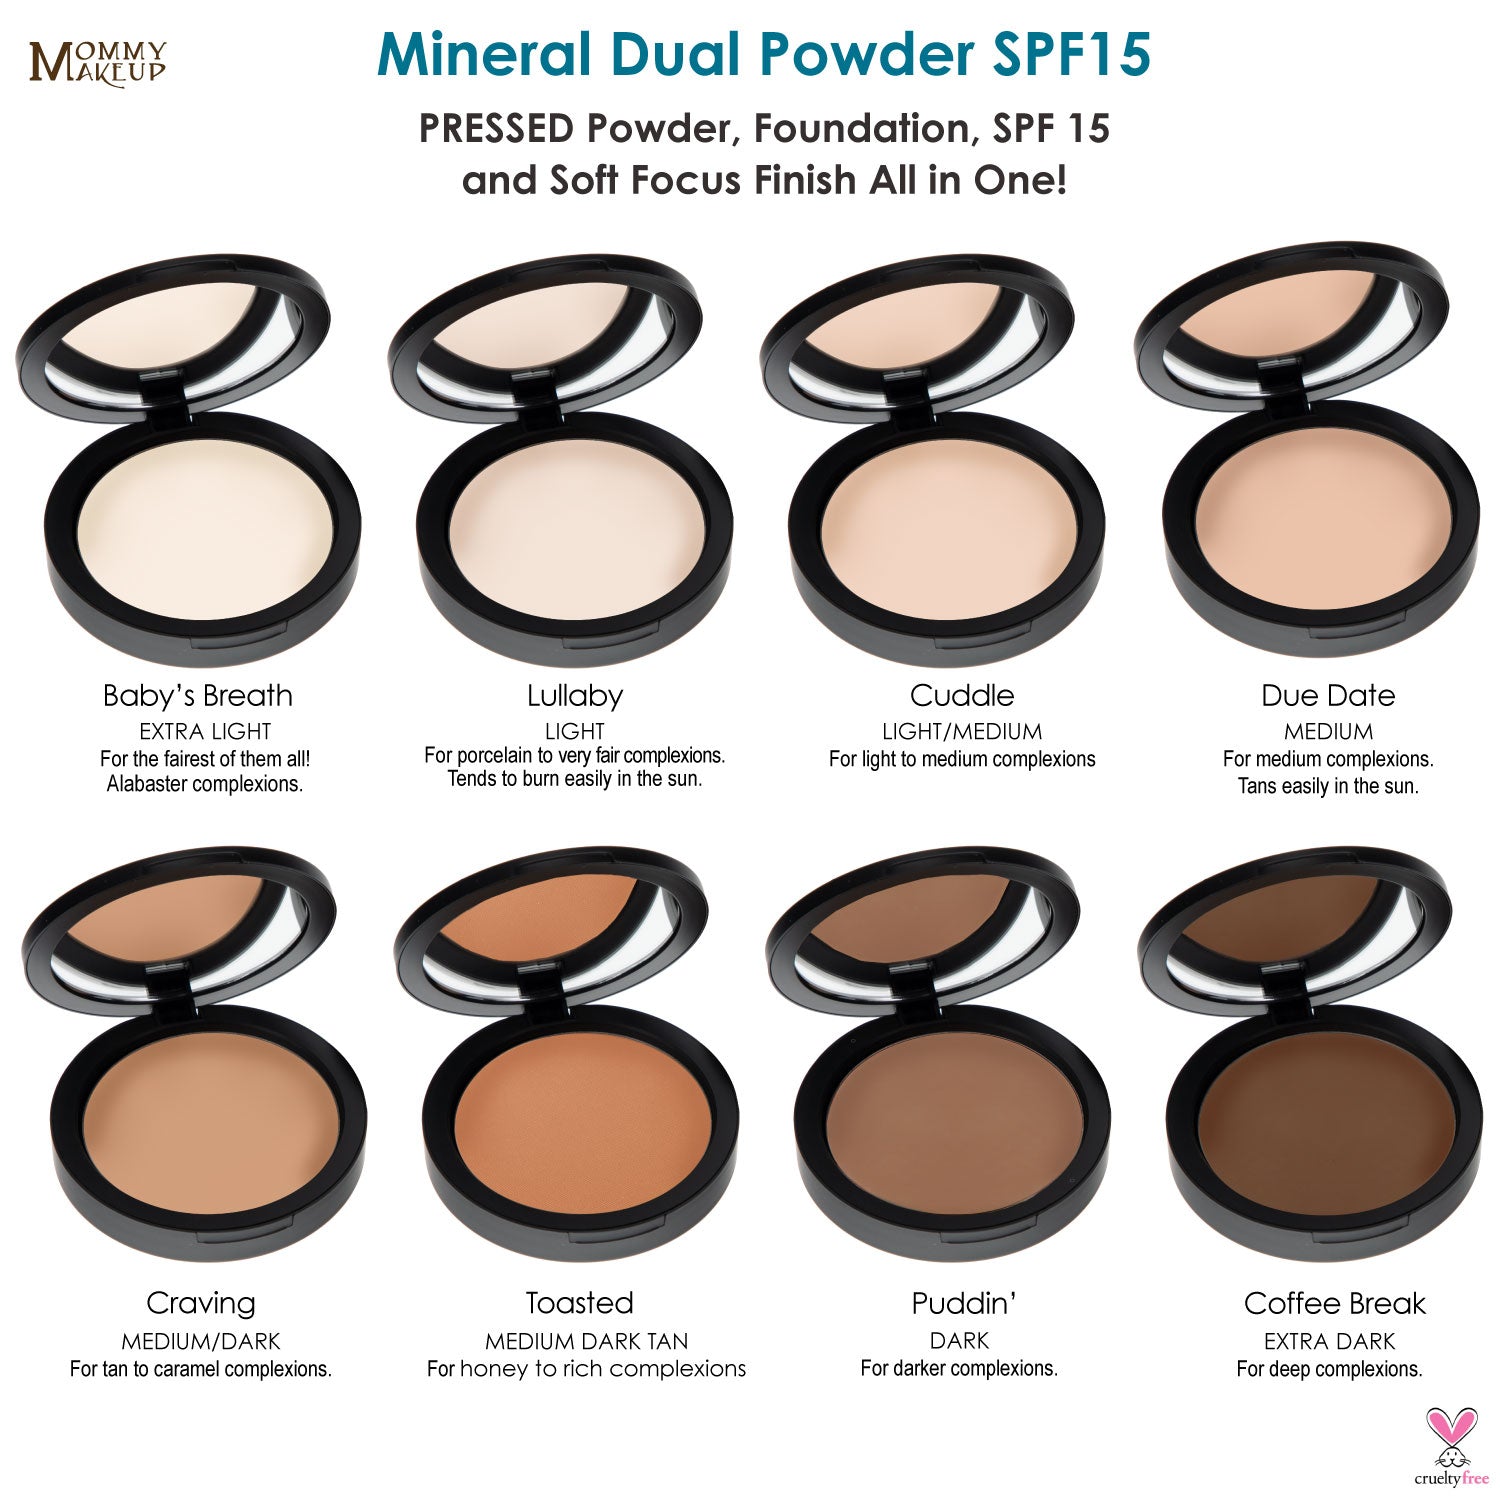 Mineral 4-in-1 Product is your PRESSED Powder, Foundation, SPF 15 and Soft Focus Finish All in One! Formulated without talc, gluten, phthalates, fragrance, GMO, parabens, or corn.